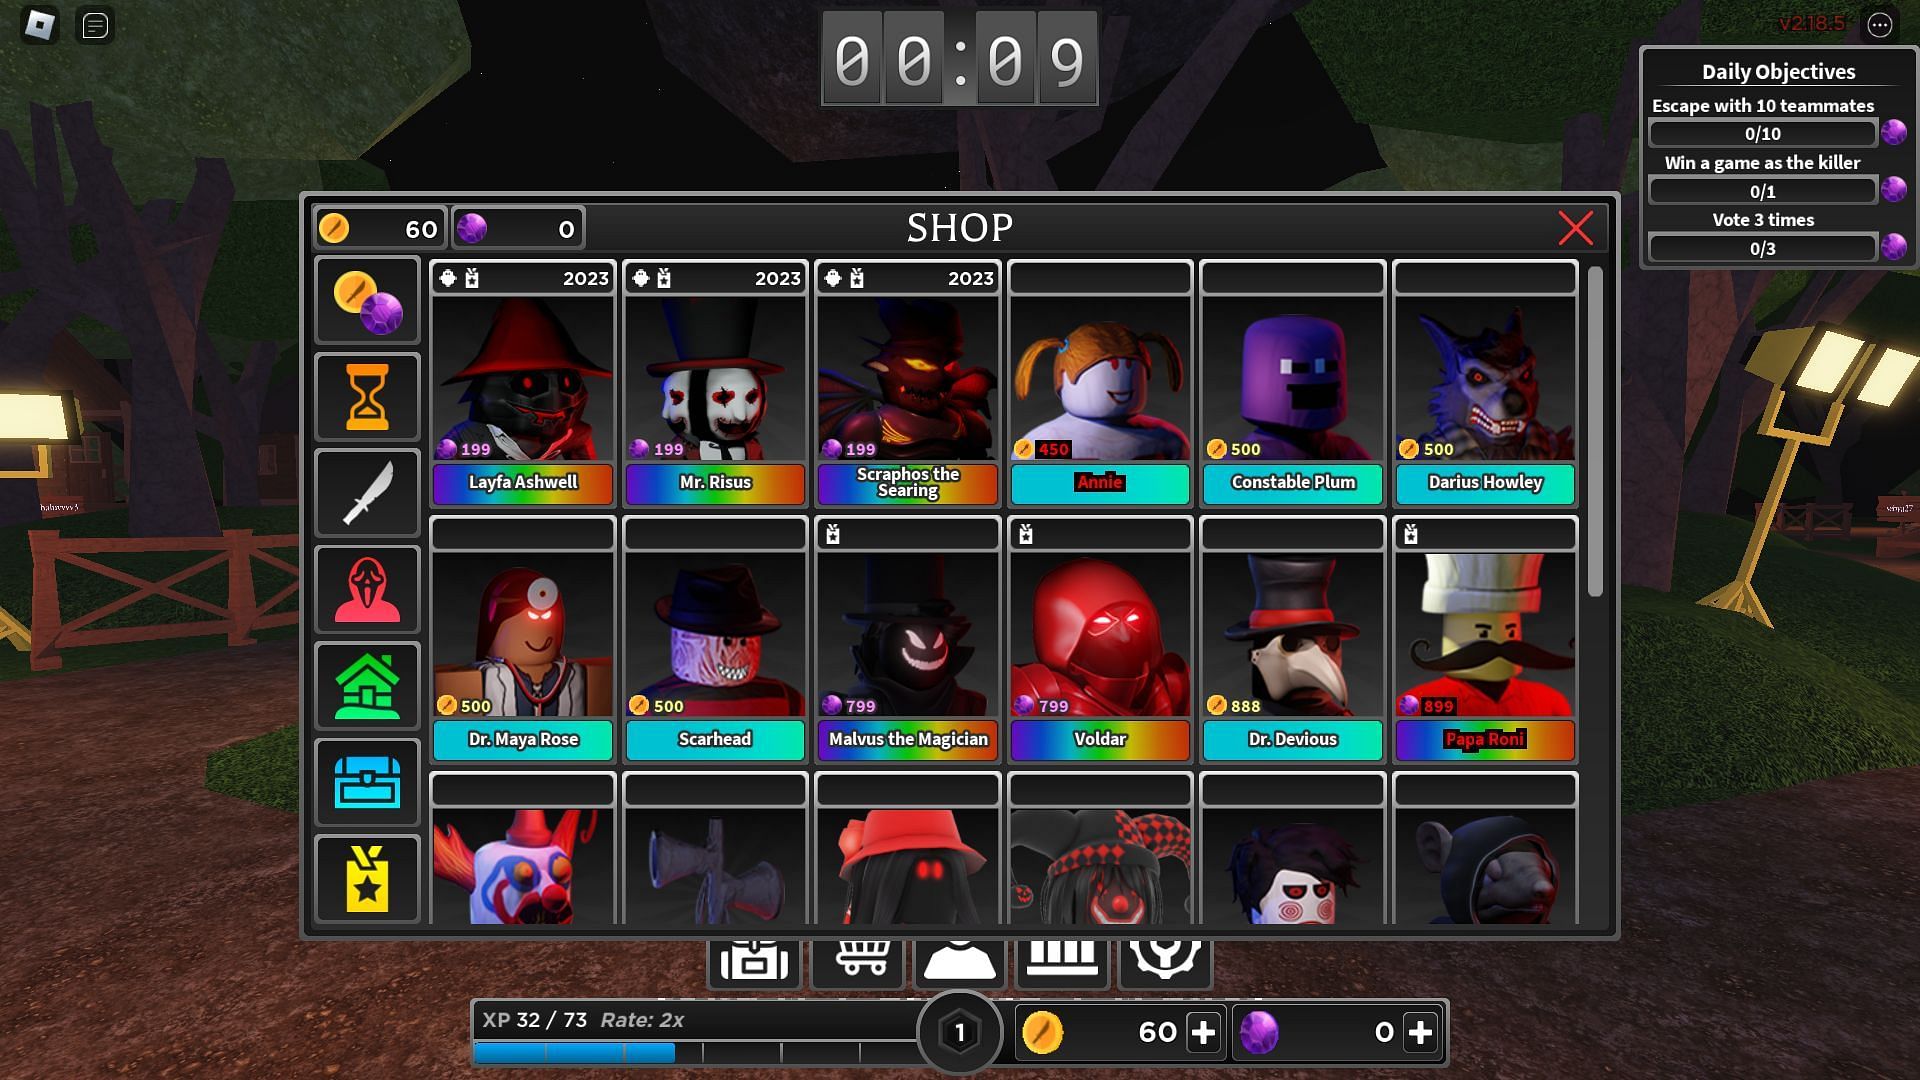 Killers available at the in-game shop. (Image via Roblox)